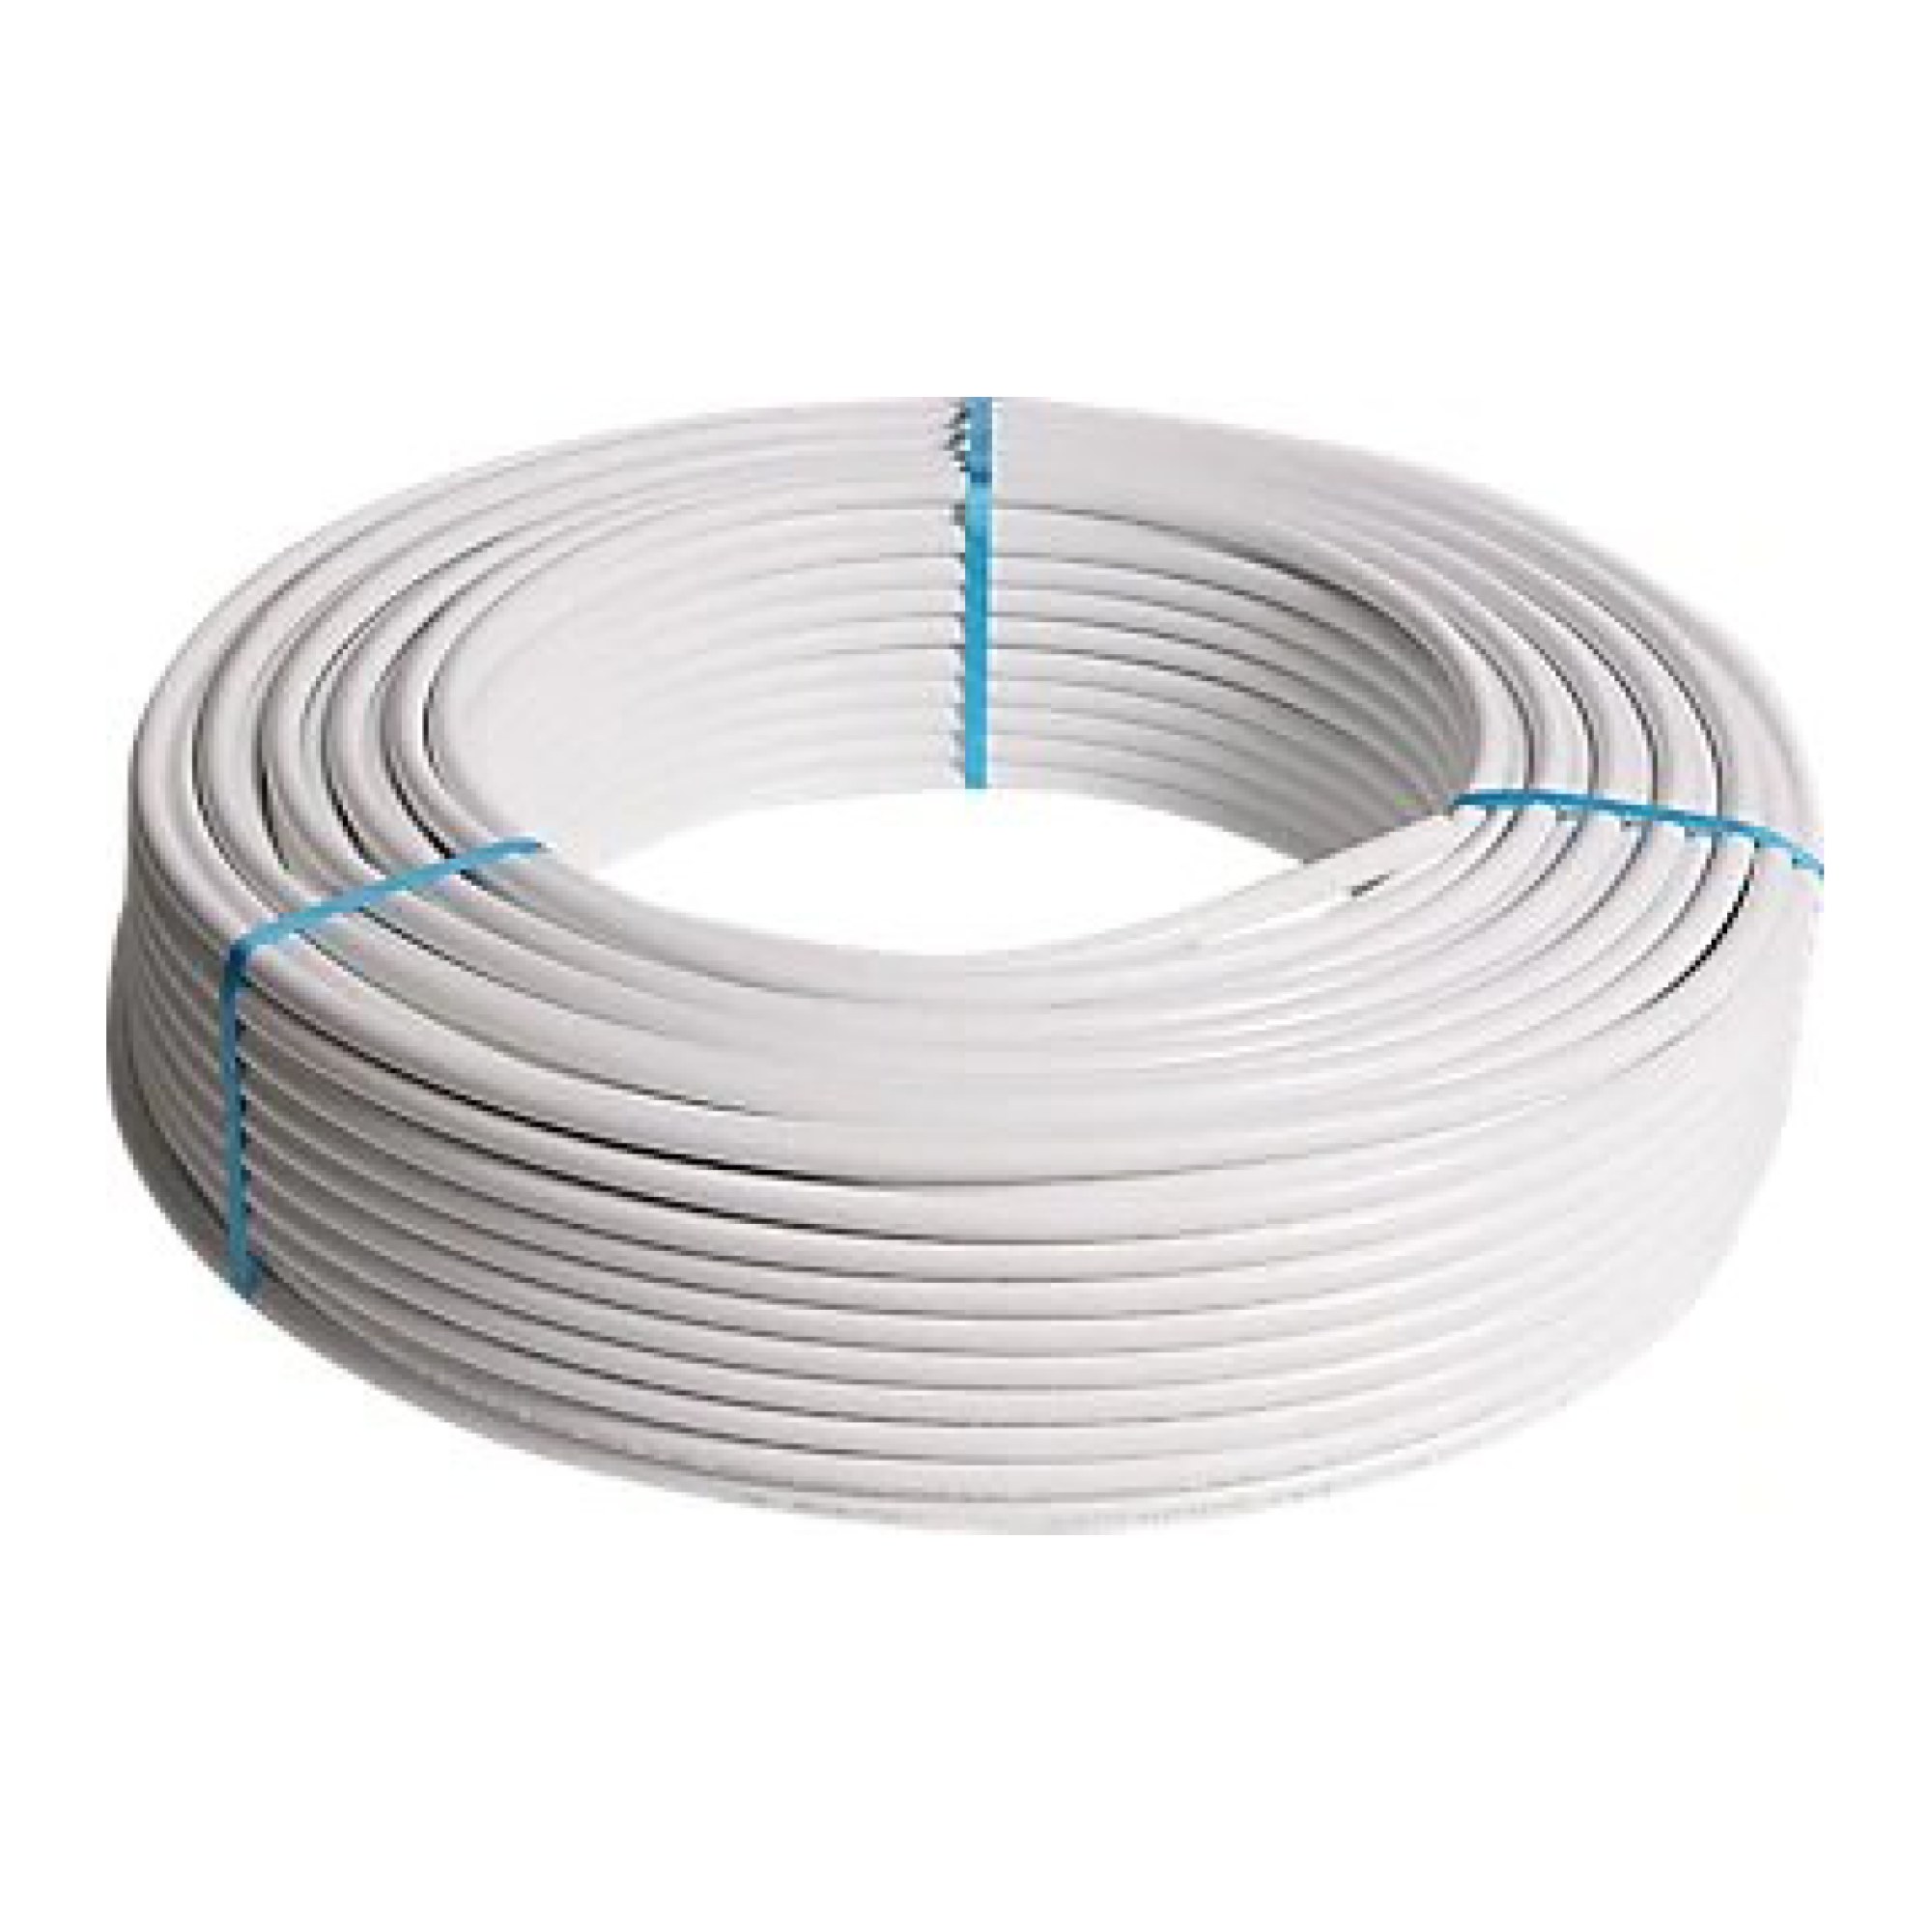 50m Tube multicouche Ø20 isolé 6mm - Discount Plomberie